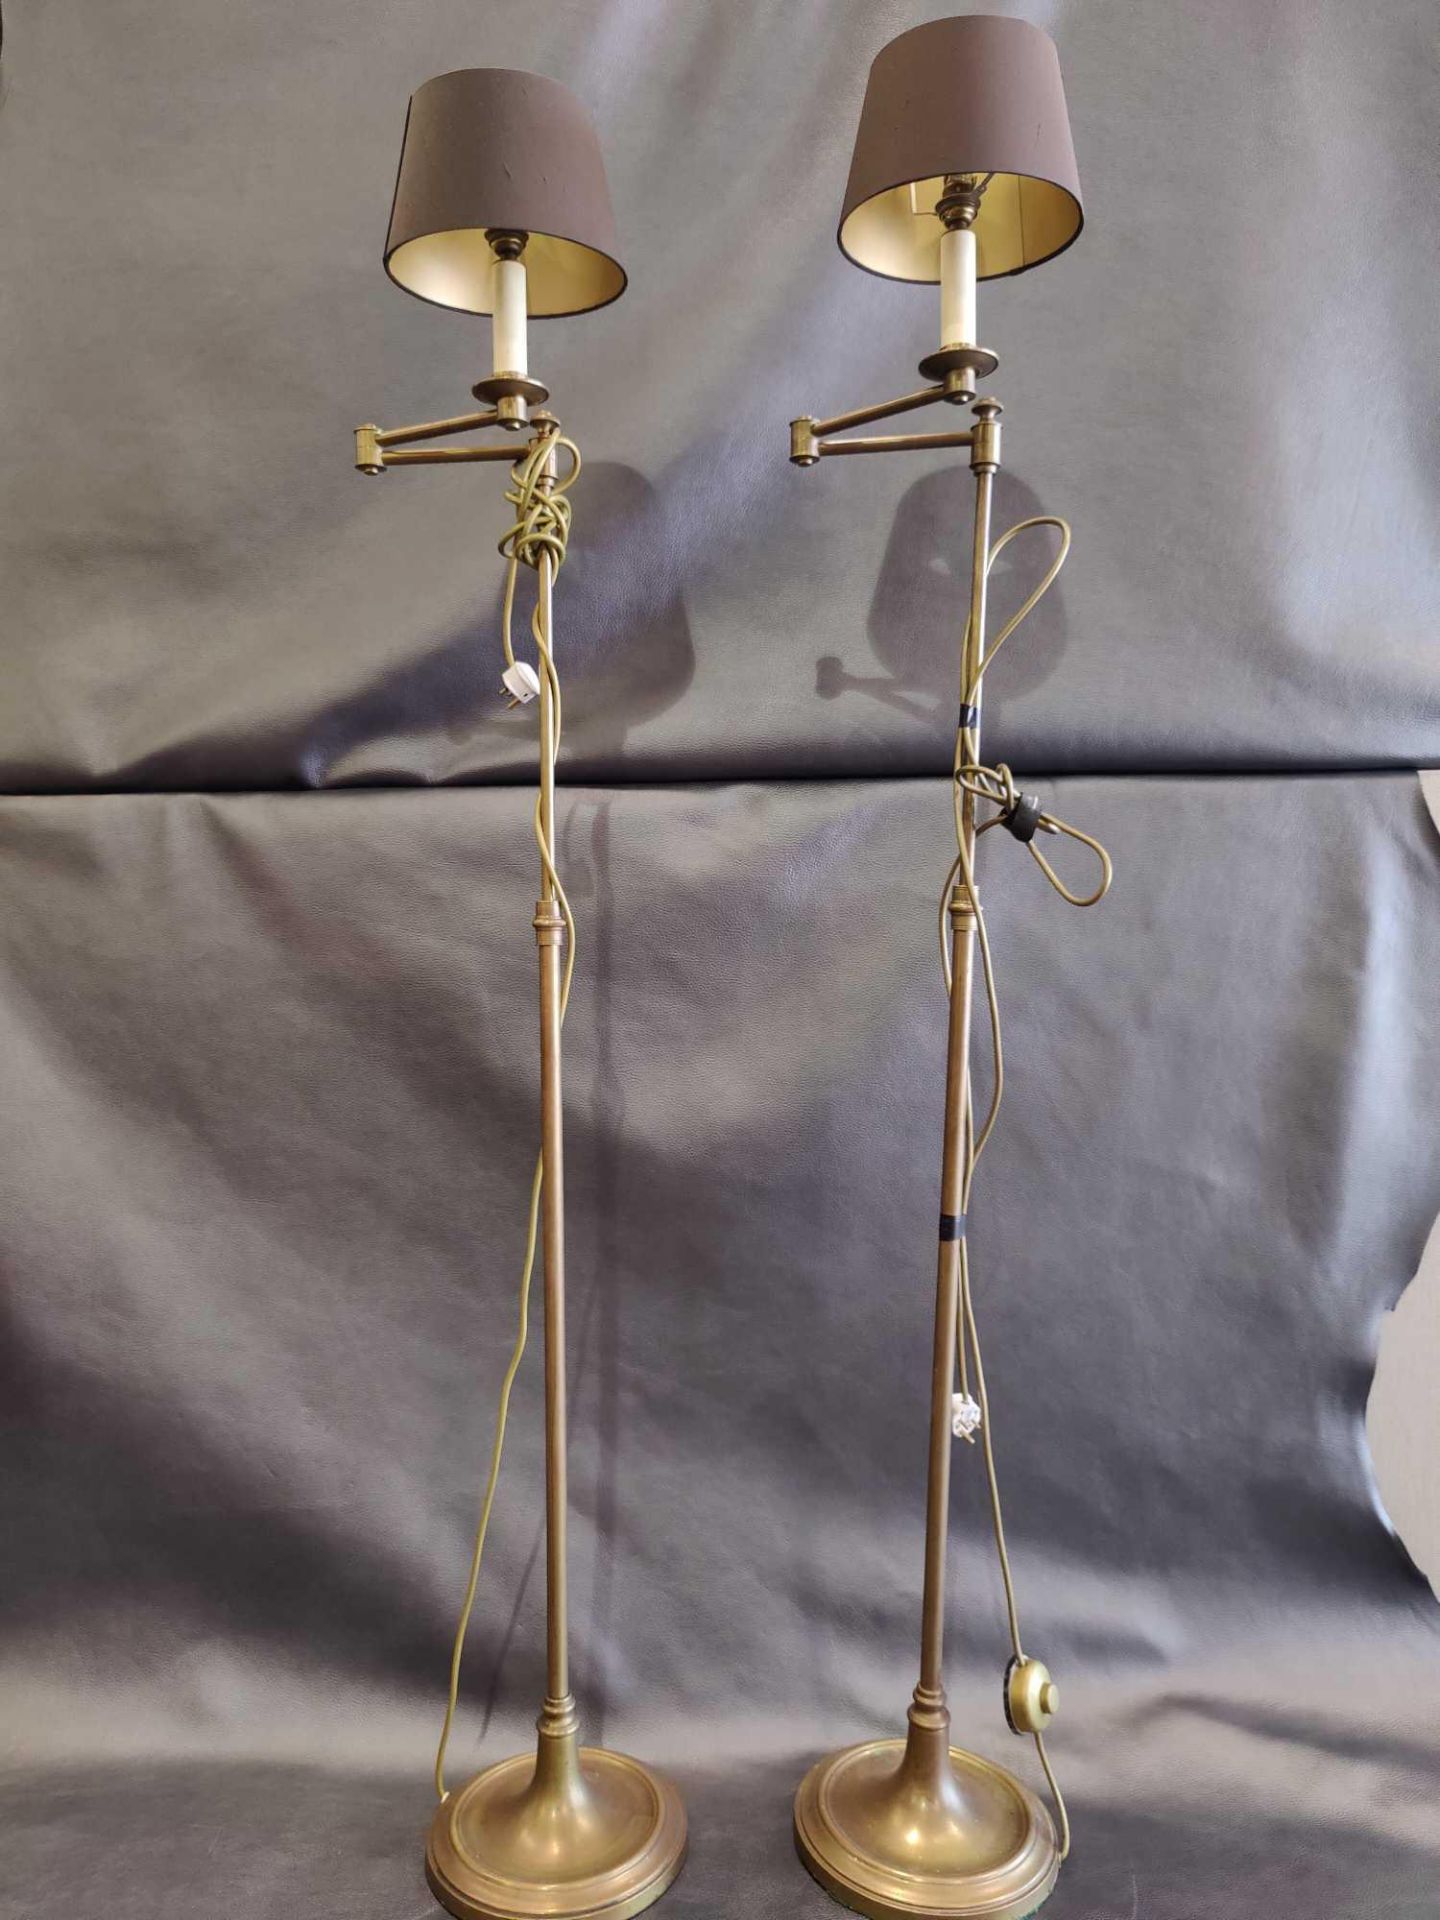 A Pair Of Library Floor Lamps Finished In English Bronze Swing Arm Function With Shade 156cm - Image 2 of 4